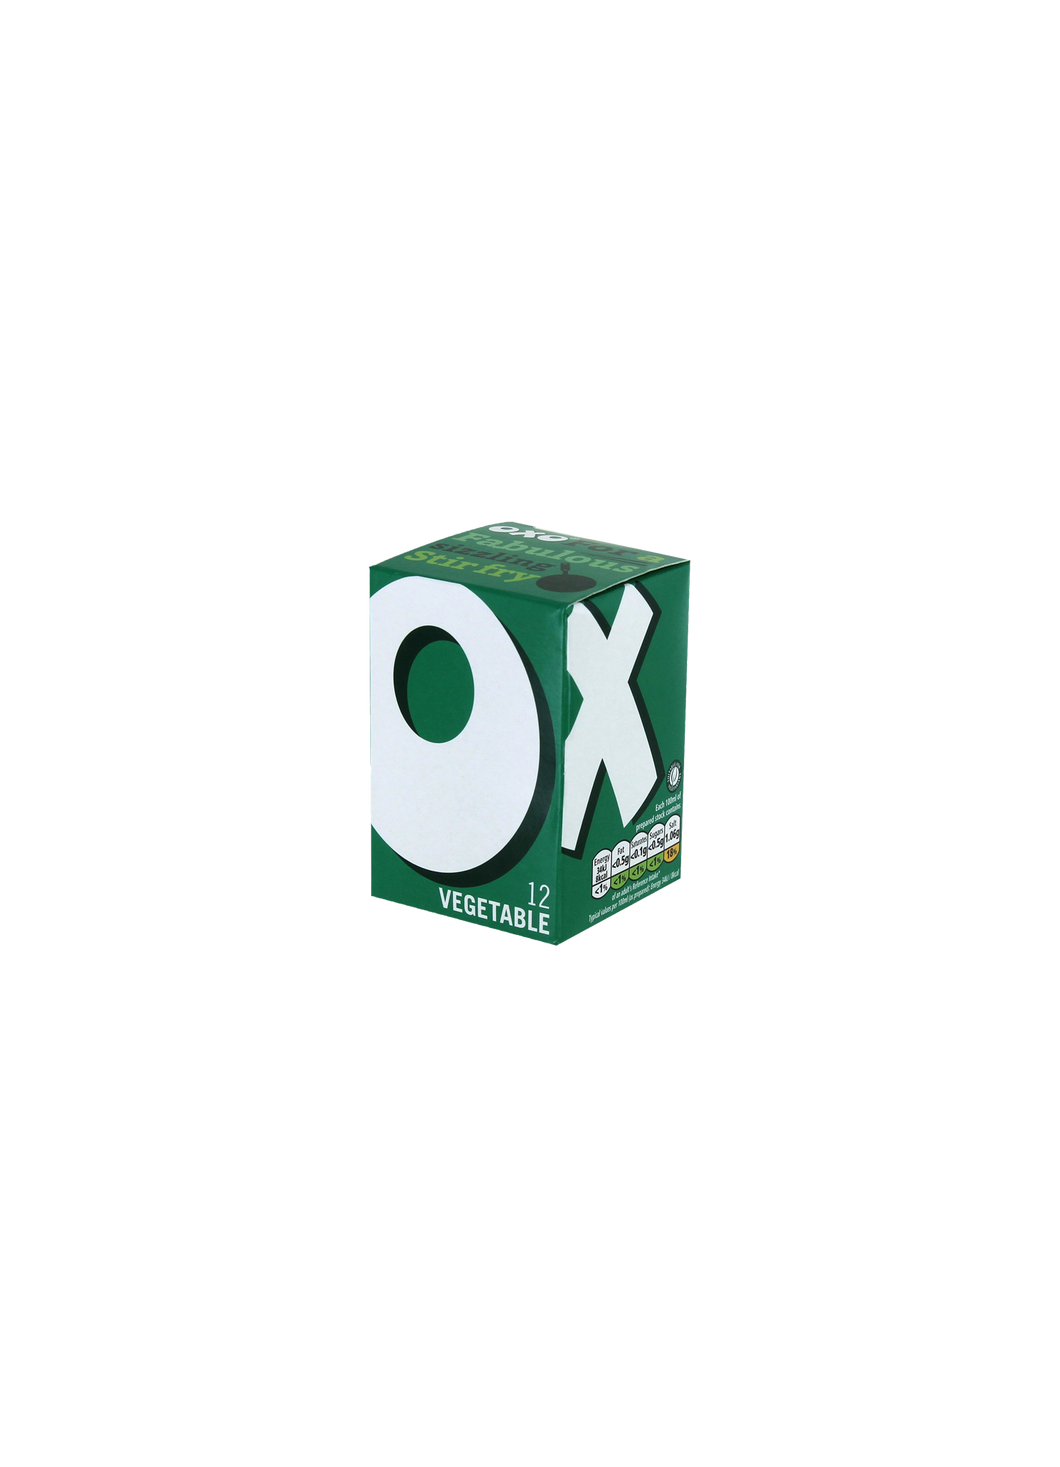 OXO 12 Vegetable Stock Cubes 71g